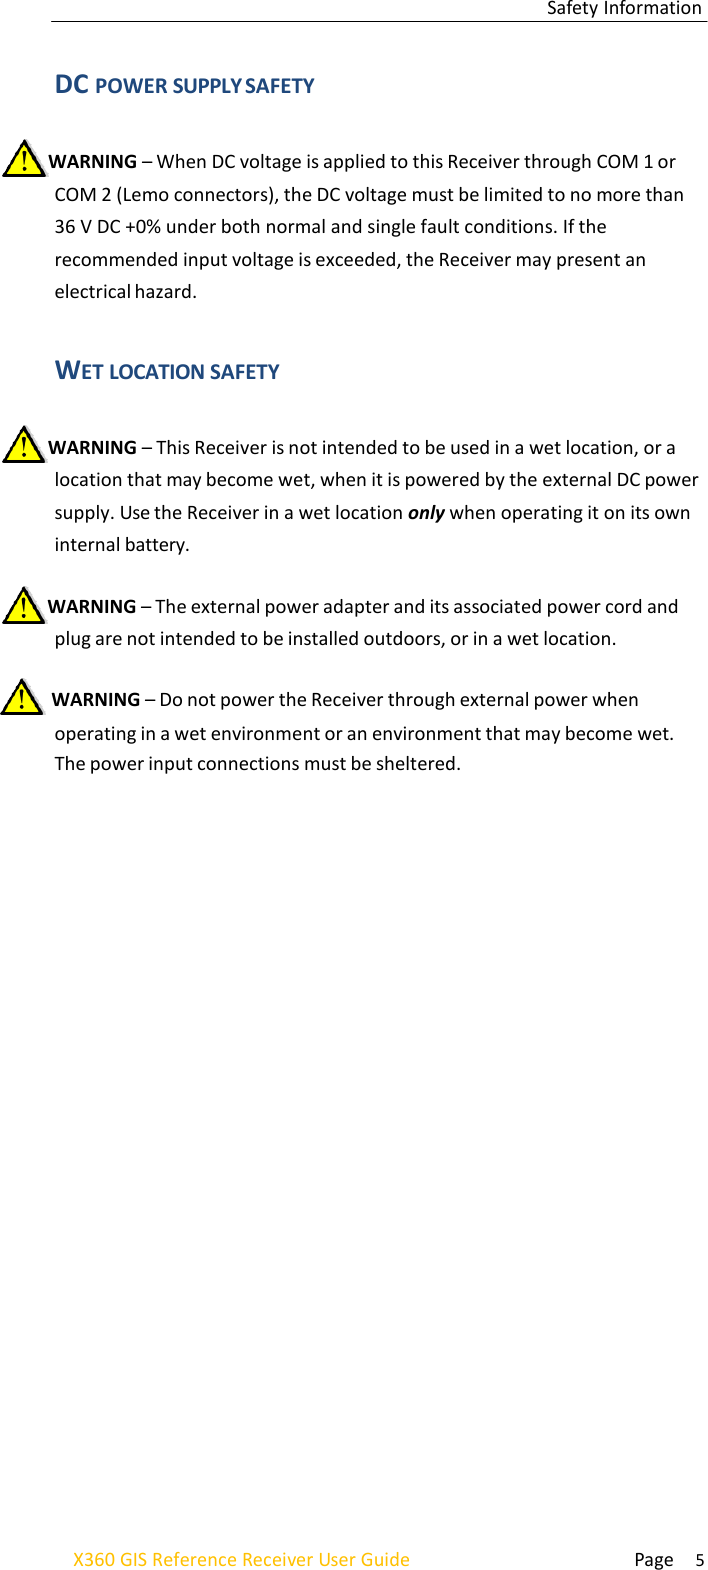  Page 5 X360 GIS Reference Receiver User Guide Safety Information    DC POWER SUPPLY SAFETY  WARNING – When DC voltage is applied to this Receiver through COM 1 or COM 2 (Lemo connectors), the DC voltage must be limited to no more than 36 V DC +0% under both normal and single fault conditions. If the recommended input voltage is exceeded, the Receiver may present an electrical hazard.   WET LOCATION SAFETY  WARNING – This Receiver is not intended to be used in a wet location, or a location that may become wet, when it is powered by the external DC power supply. Use the Receiver in a wet location only when operating it on its own internal battery.  WARNING – The external power adapter and its associated power cord and plug are not intended to be installed outdoors, or in a wet location.   WARNING – Do not power the Receiver through external power when operating in a wet environment or an environment that may become wet. The power input connections must be sheltered. 